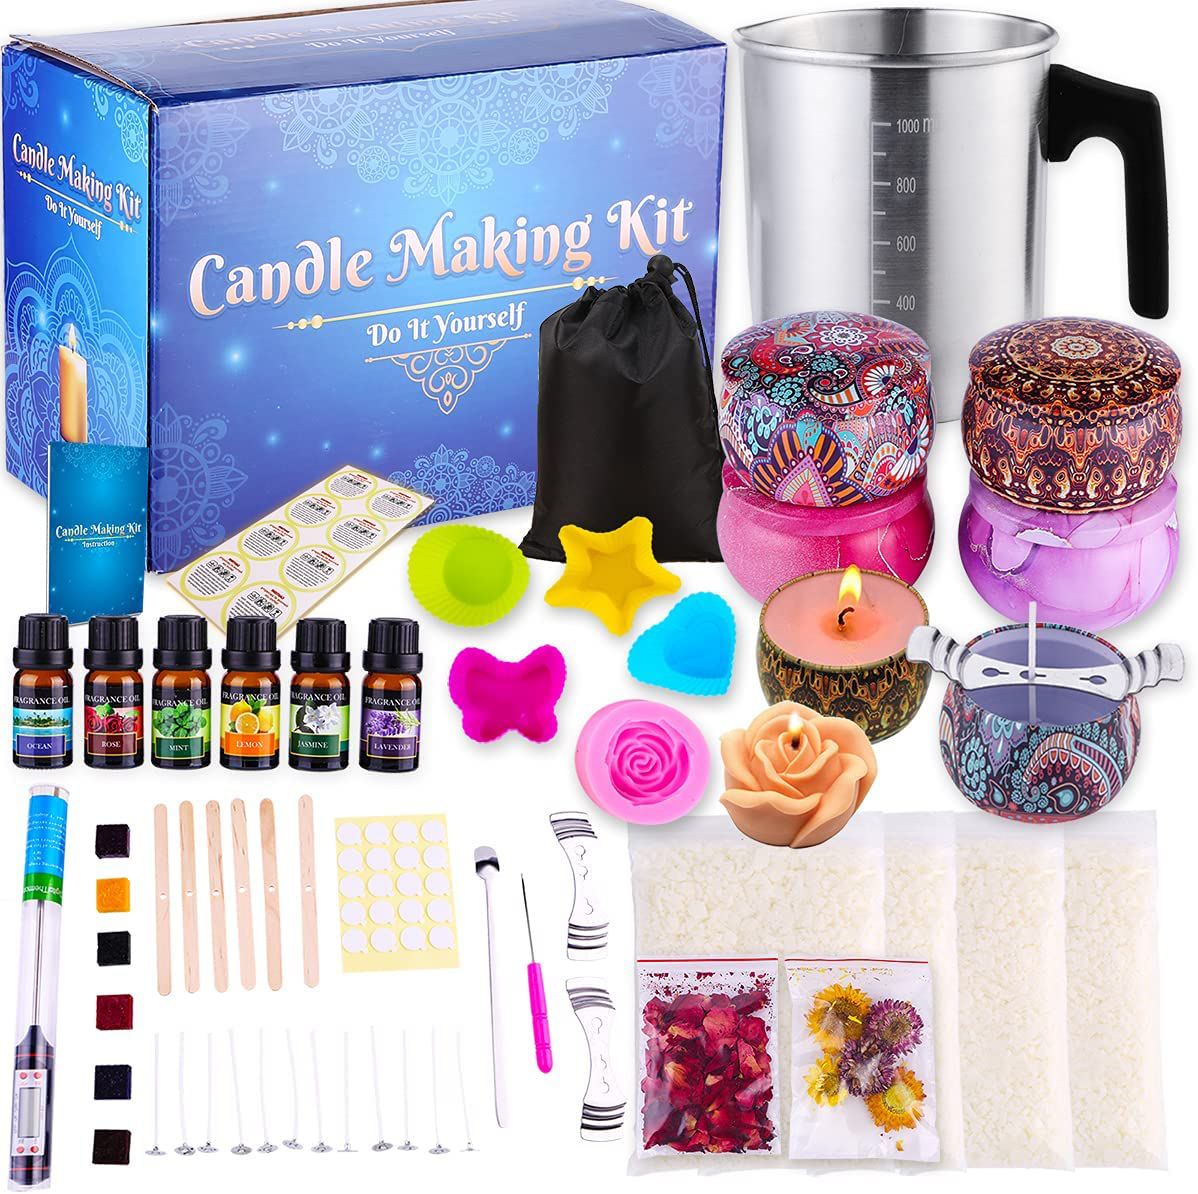 Catcrafter Phoenix Mall Scented DIY Candle Making Art Soy Wax Kit Quality inspection